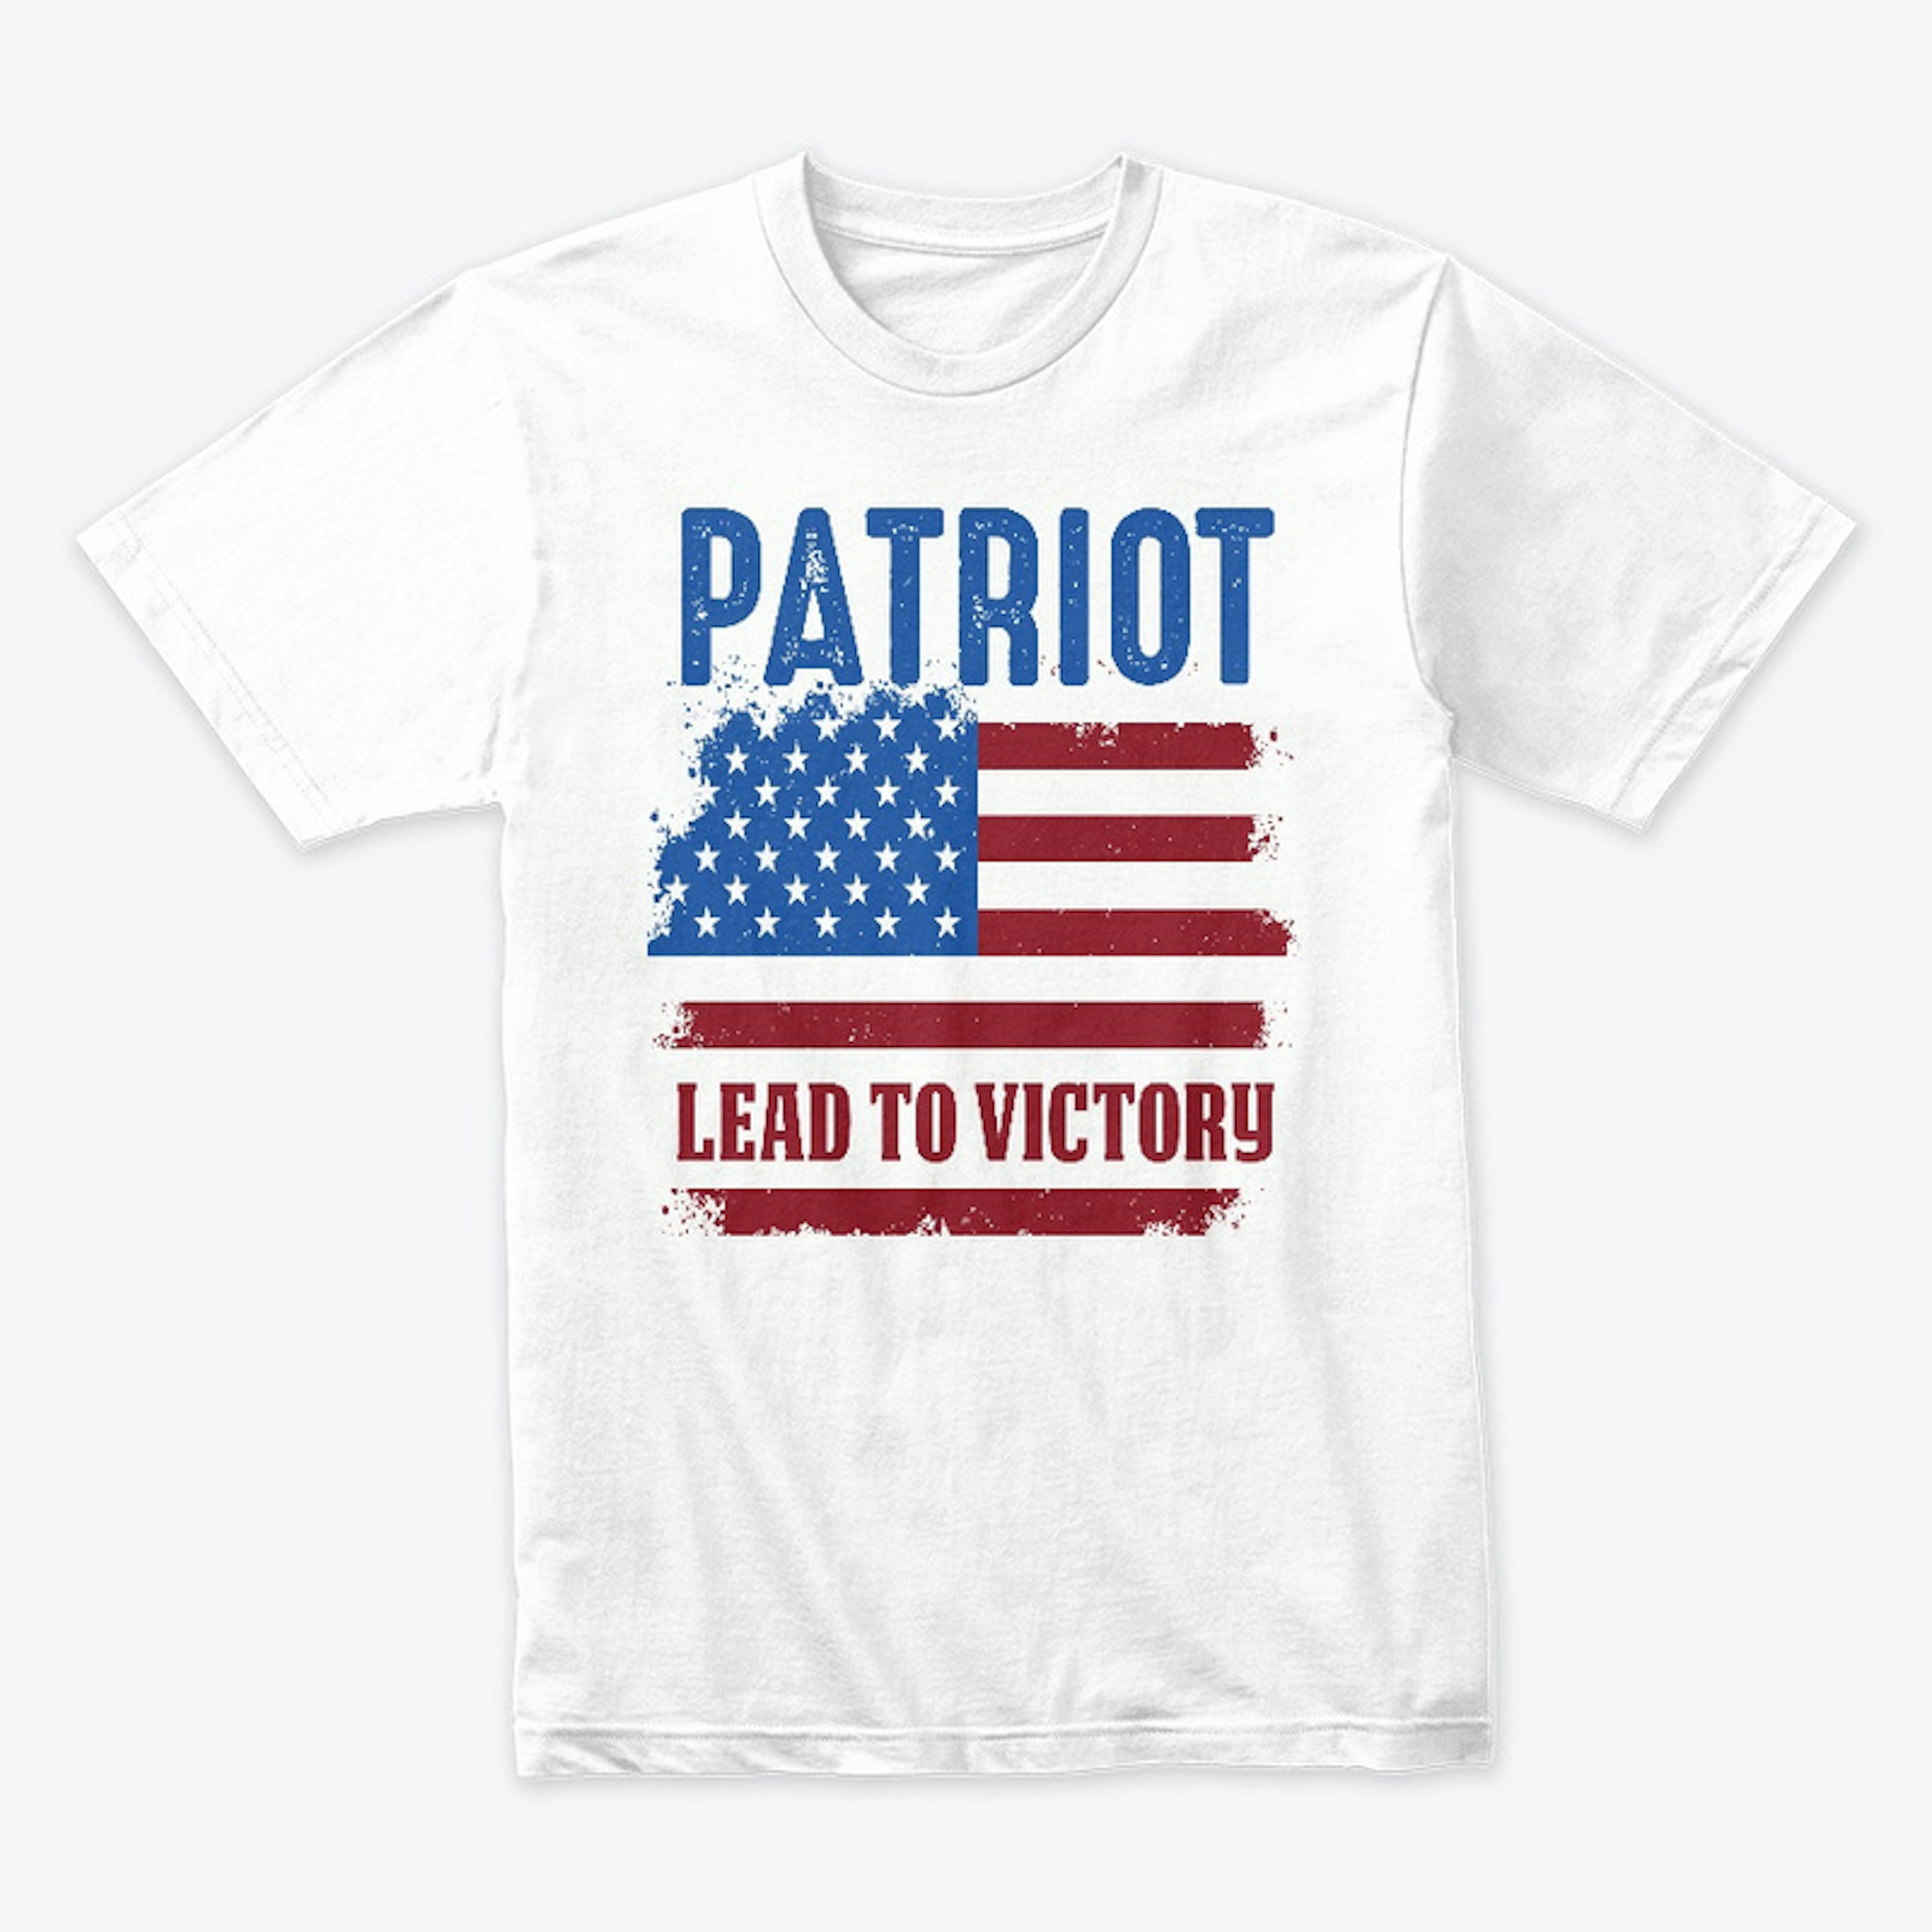 PATRIOT Lead to Victory WHITE